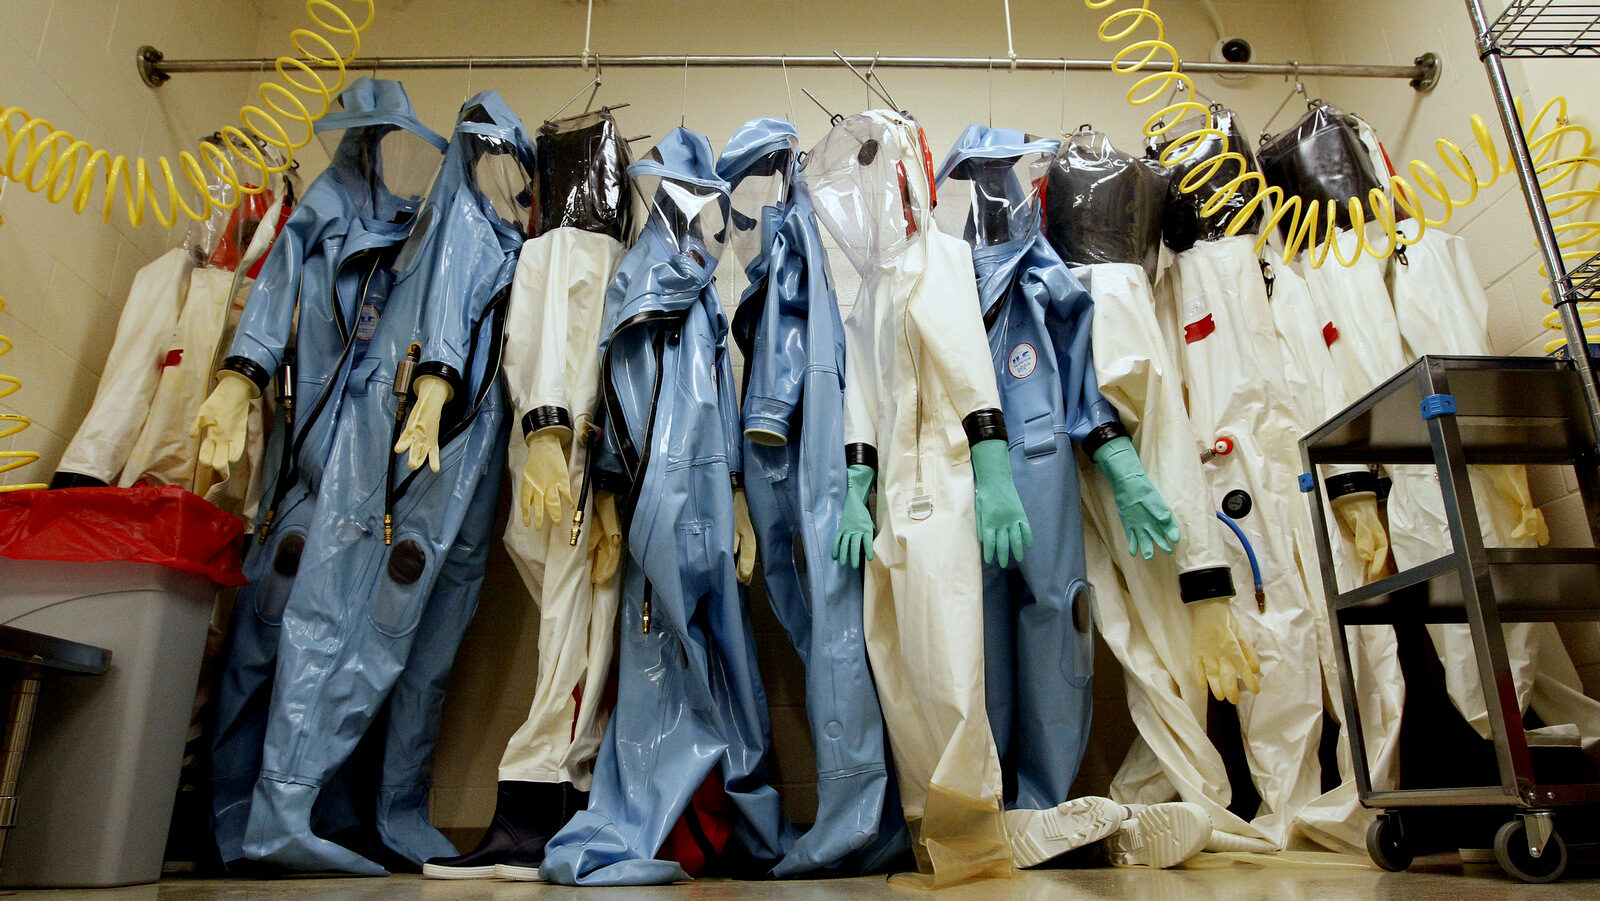 Biohazard suits hang in a Biosafety Level 4 laboratory at the U.S. Army Medical Research Institute of Infectious Diseases at Fort Detrick, Md. (AP/Patrick Semansky)